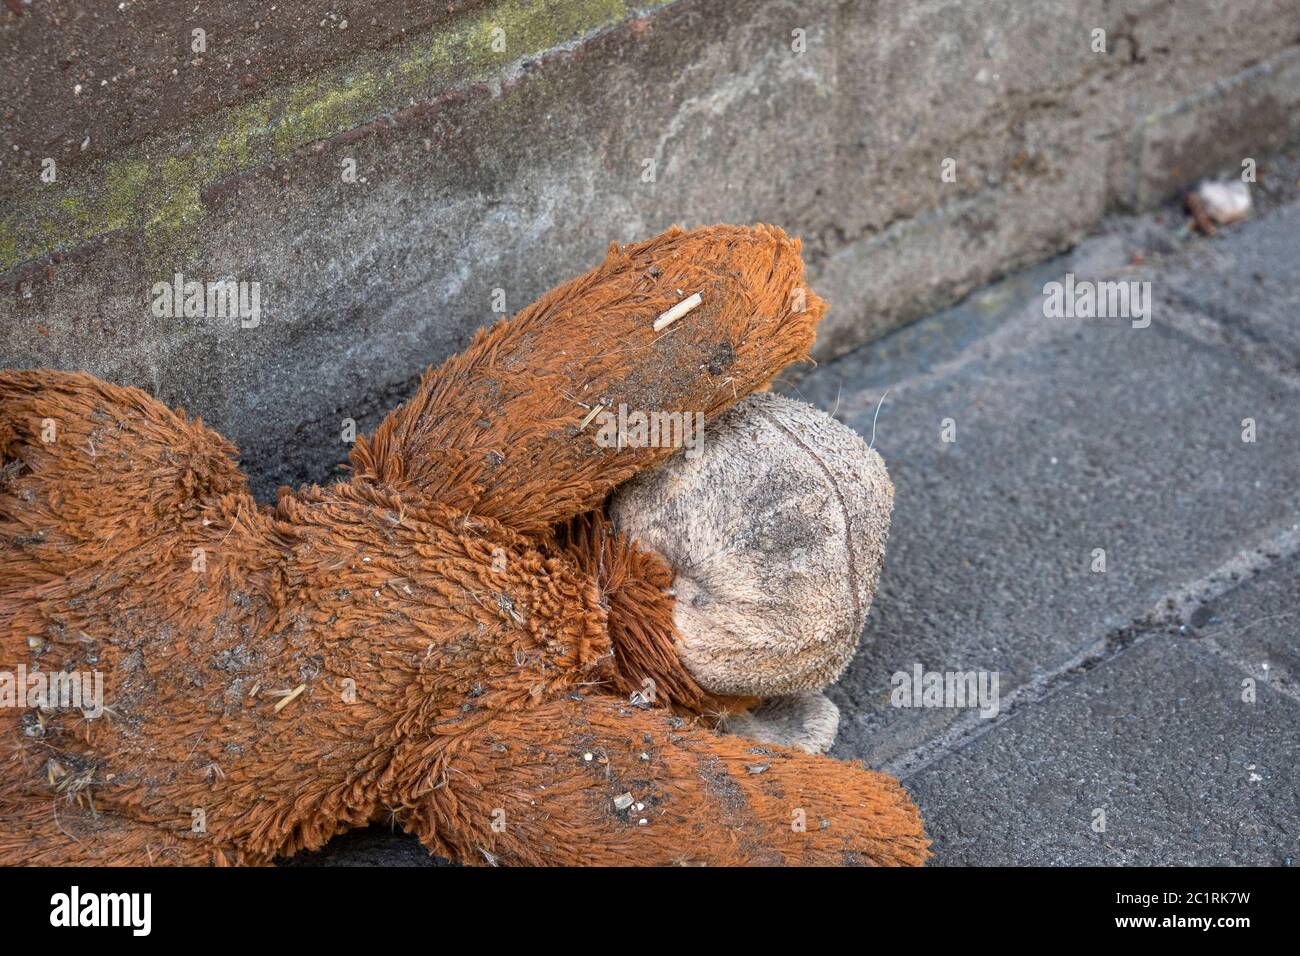 Old teddy bear is left in the dirt on the sidewalk Stock Photo